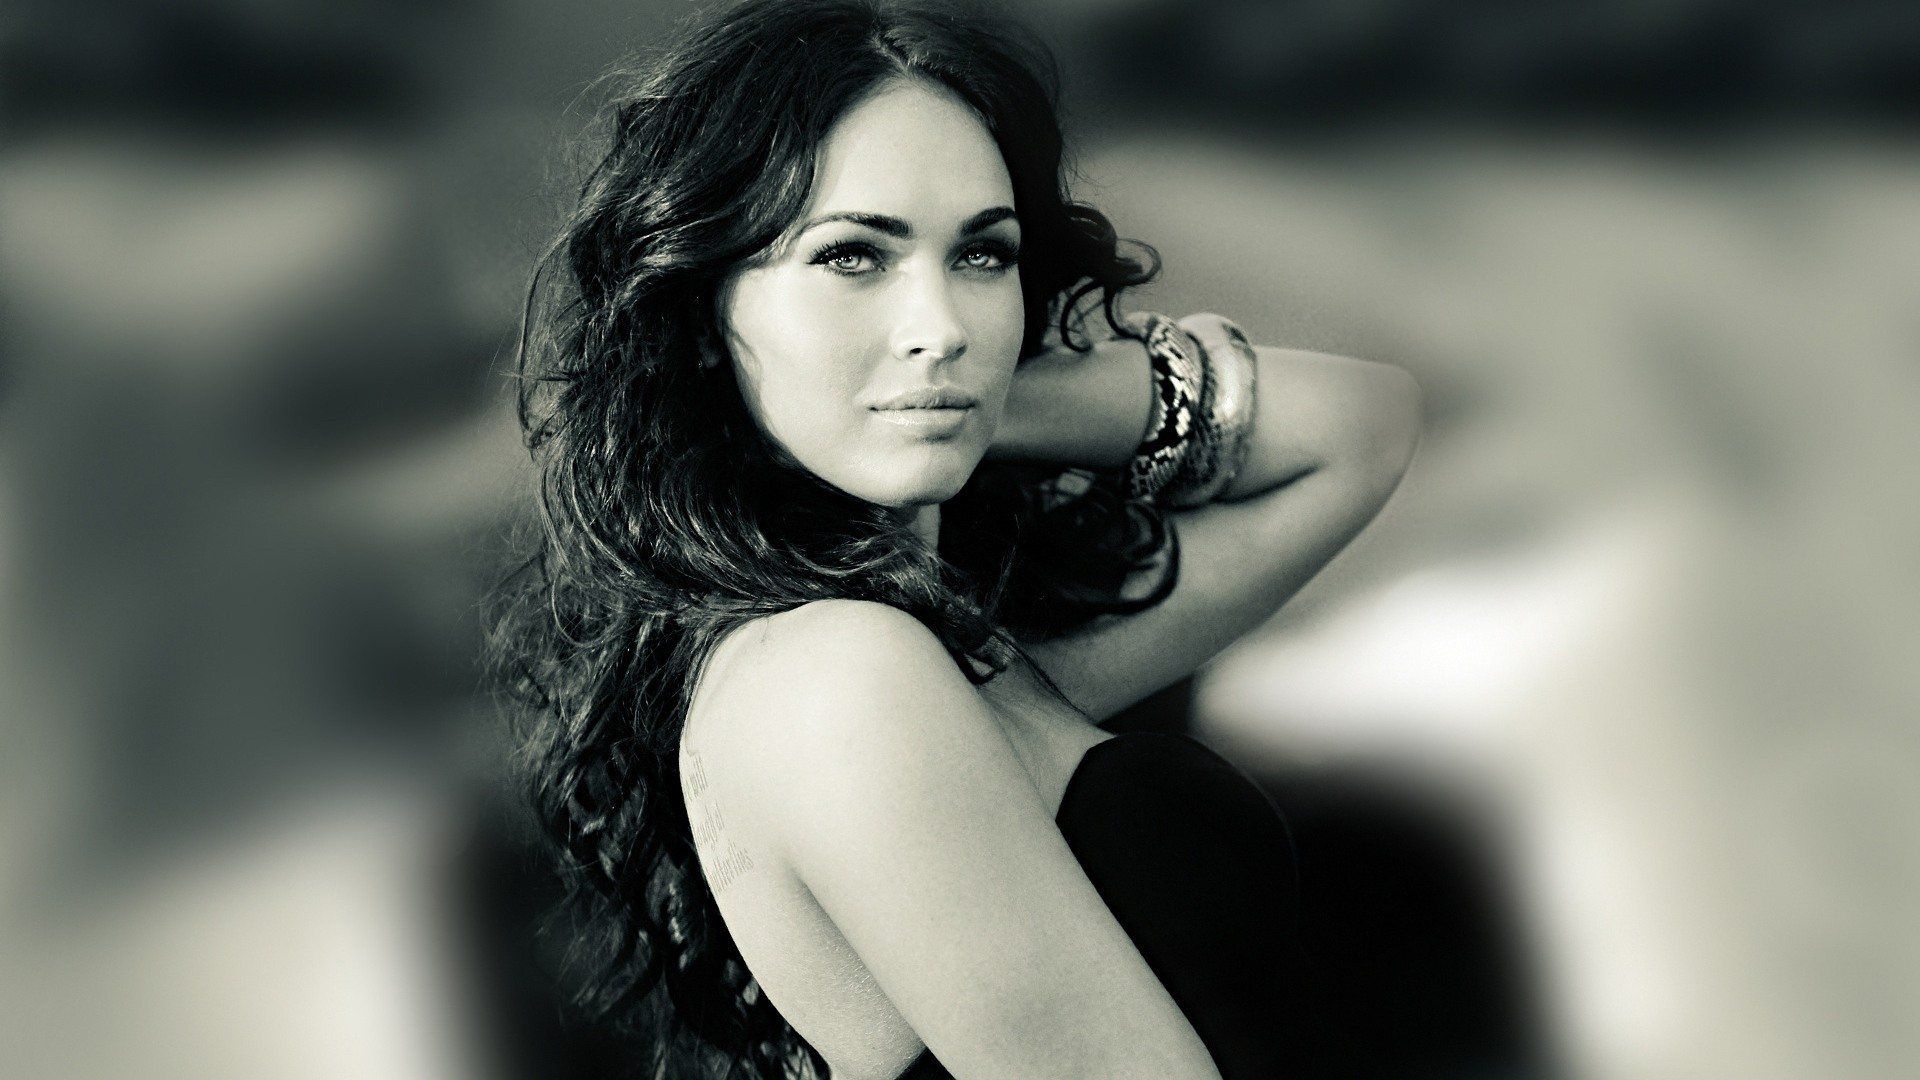 Megan Fox HD Wallpapers Mean Fox Background Images Cool Backgrounds